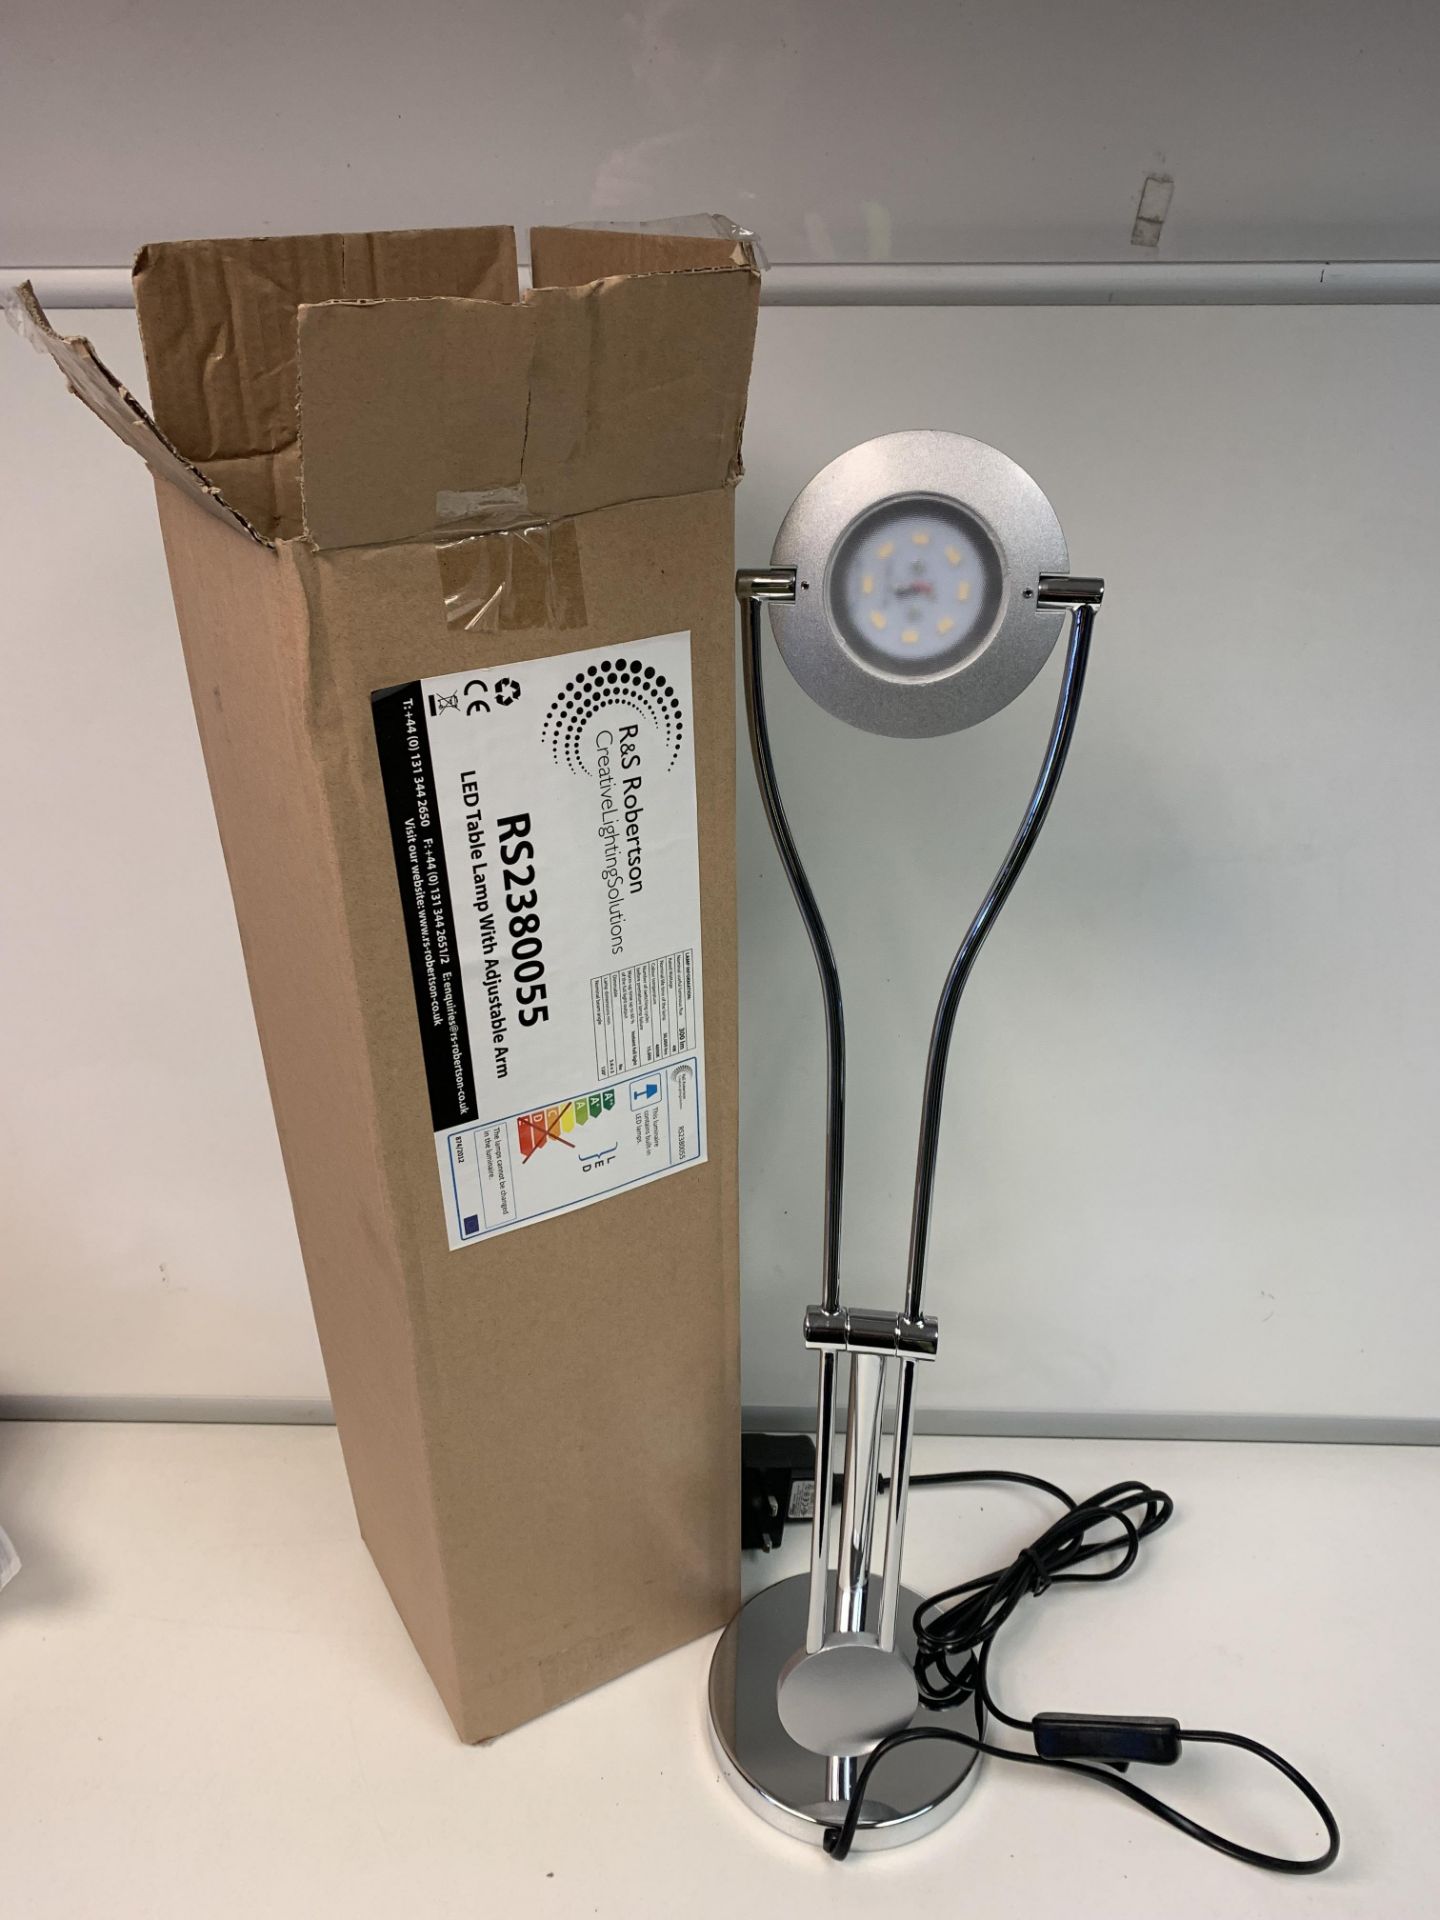 10 X NEW BOXED DESIGNER 5W LED ADJUSTABLE DESK LAMP WITH IN-LINE SWITCH. RRP £52 EACH (ROW9).